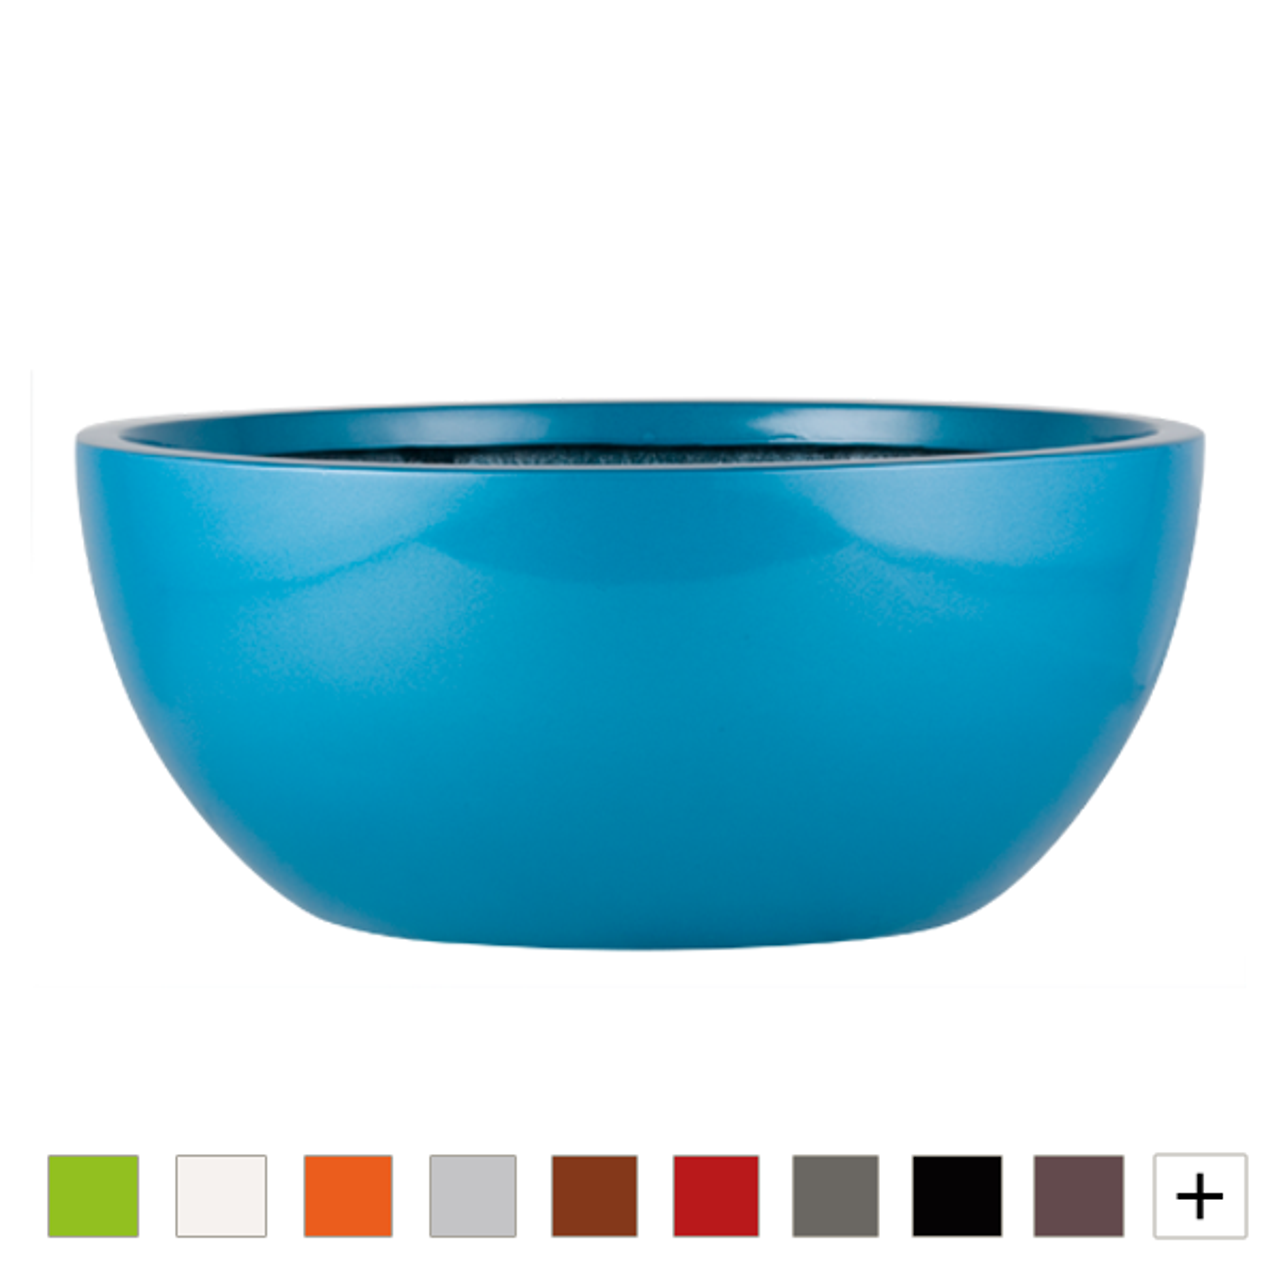 https://cdn11.bigcommerce.com/s-86h0kzno/images/stencil/1280x1280/products/1366/16775/PS_Earth_Bowl_Planter_Swatches_copy__51939.1486047765.png?c=2